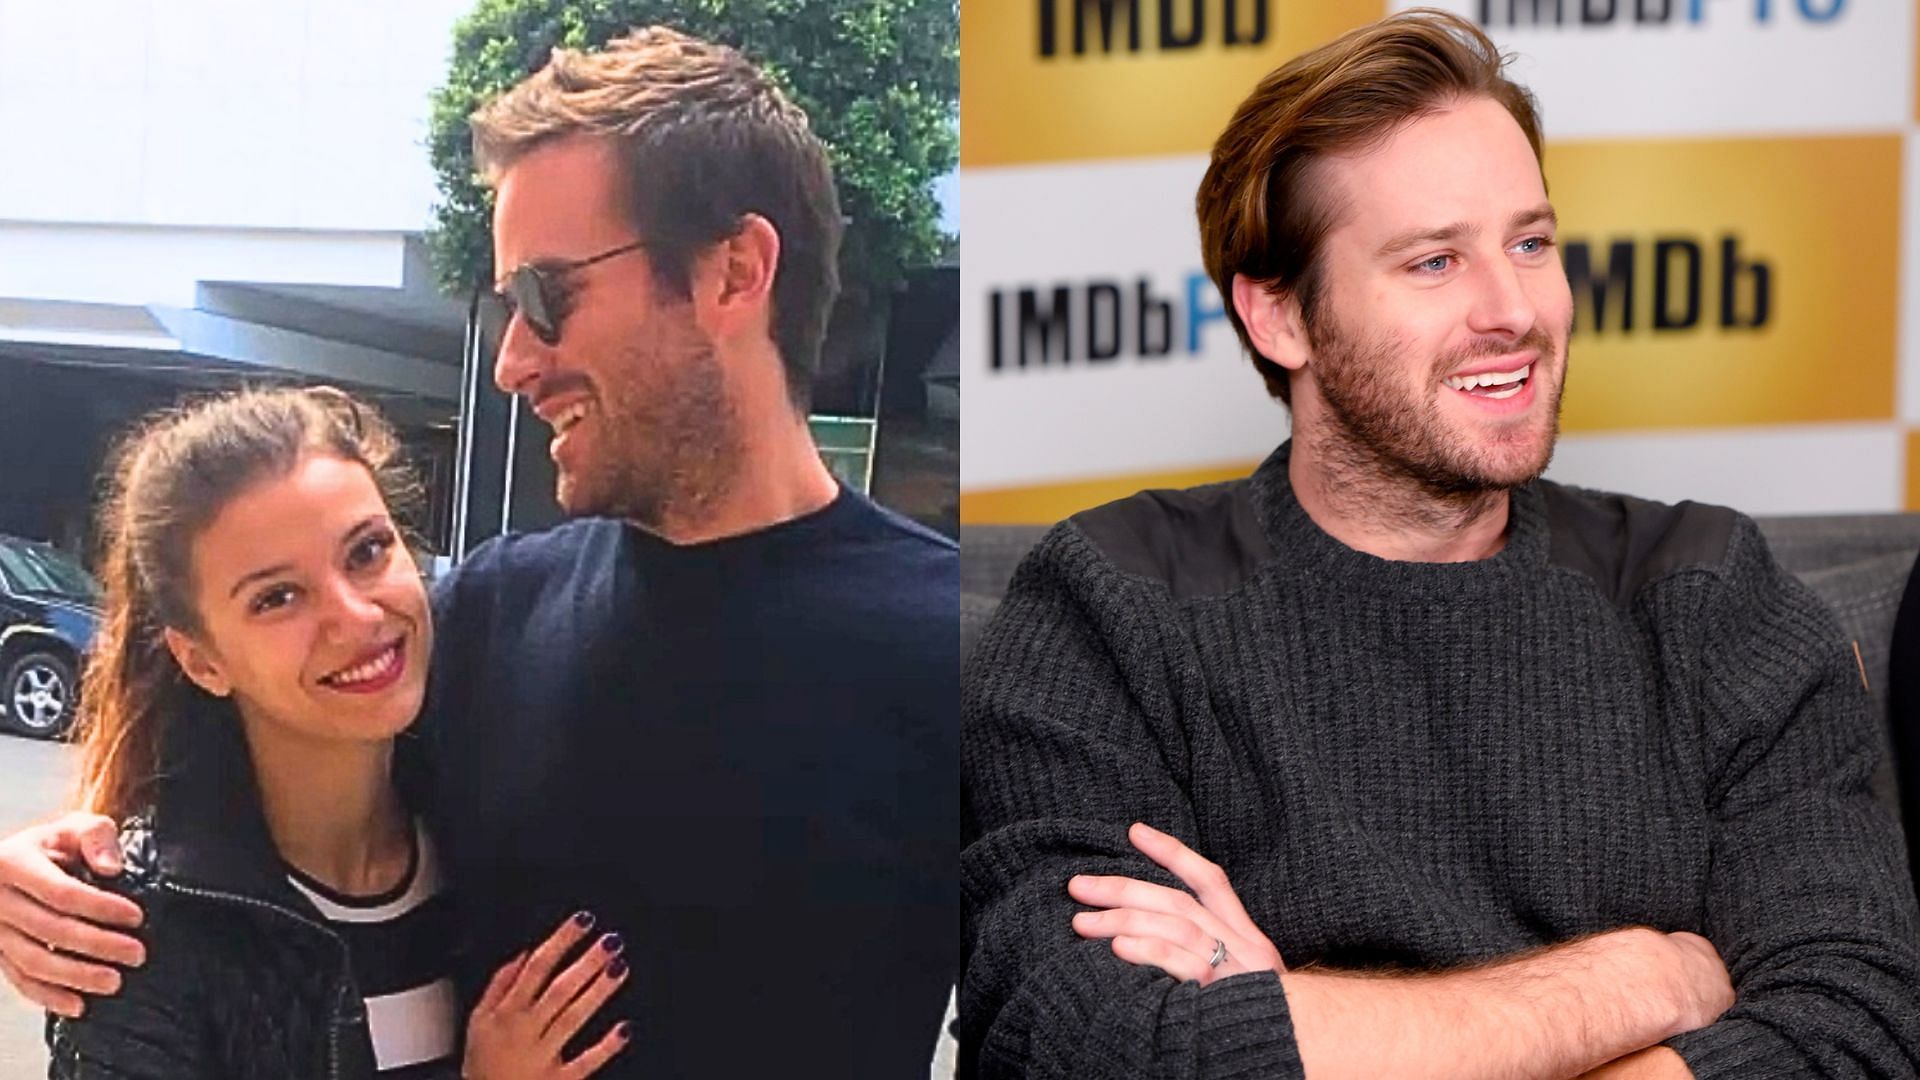 Effie Angelova was the first woman who accused actor Armie Hammer (Images via Instagram/@thesarahhepolaexperience IMDb)